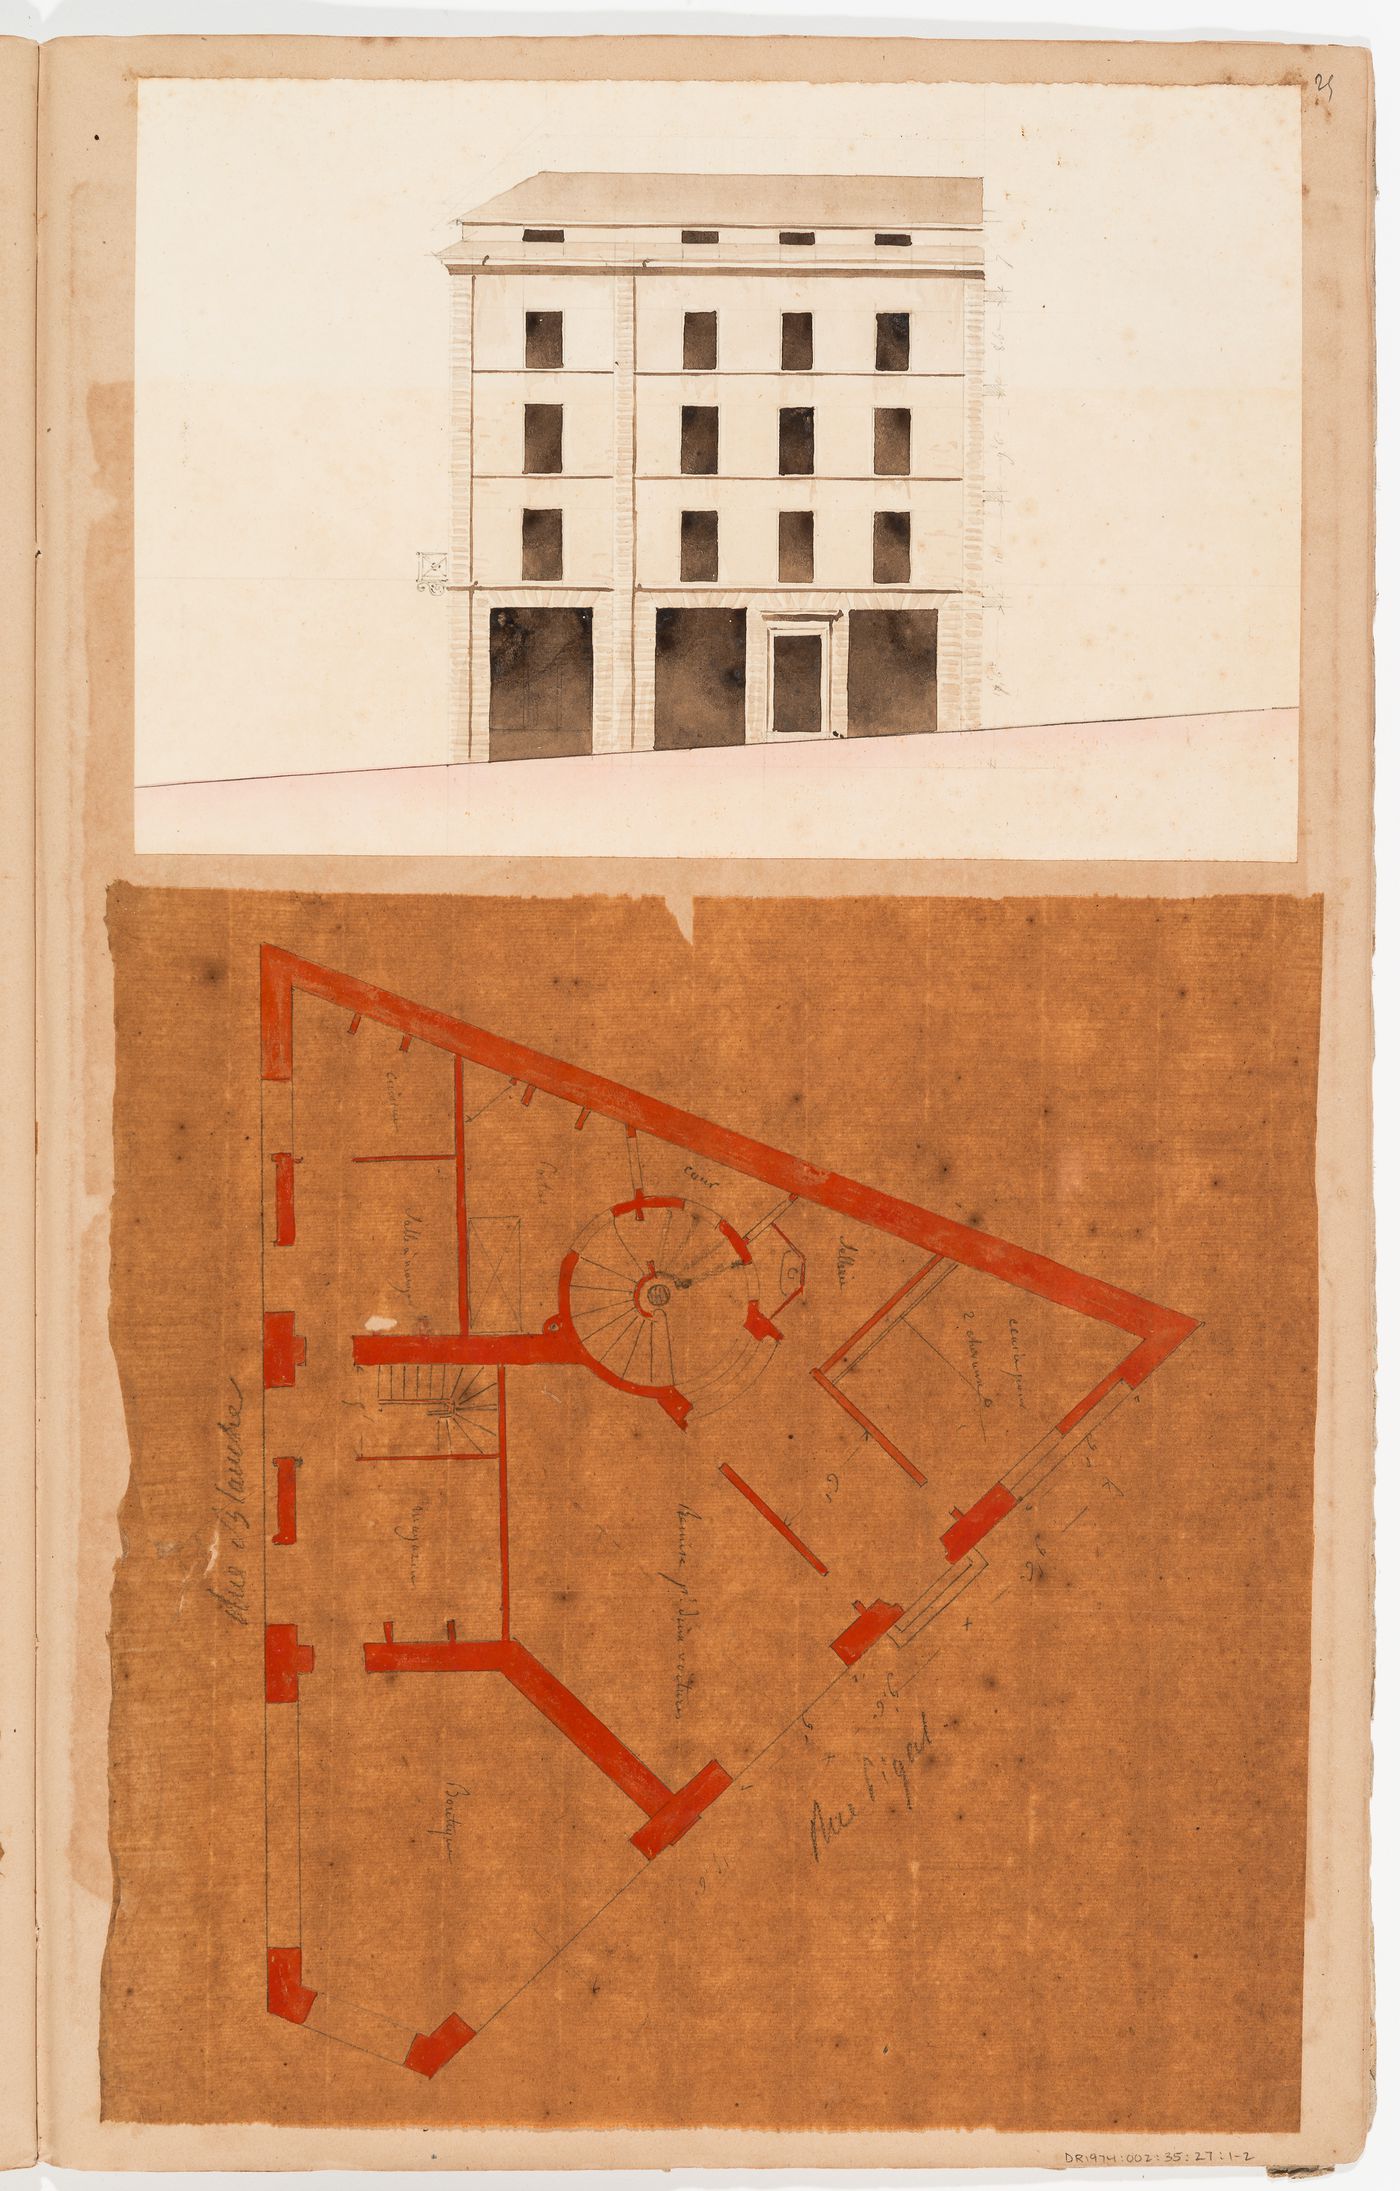 Elevation and ground floor plan for a house at the corner of rue de la ...